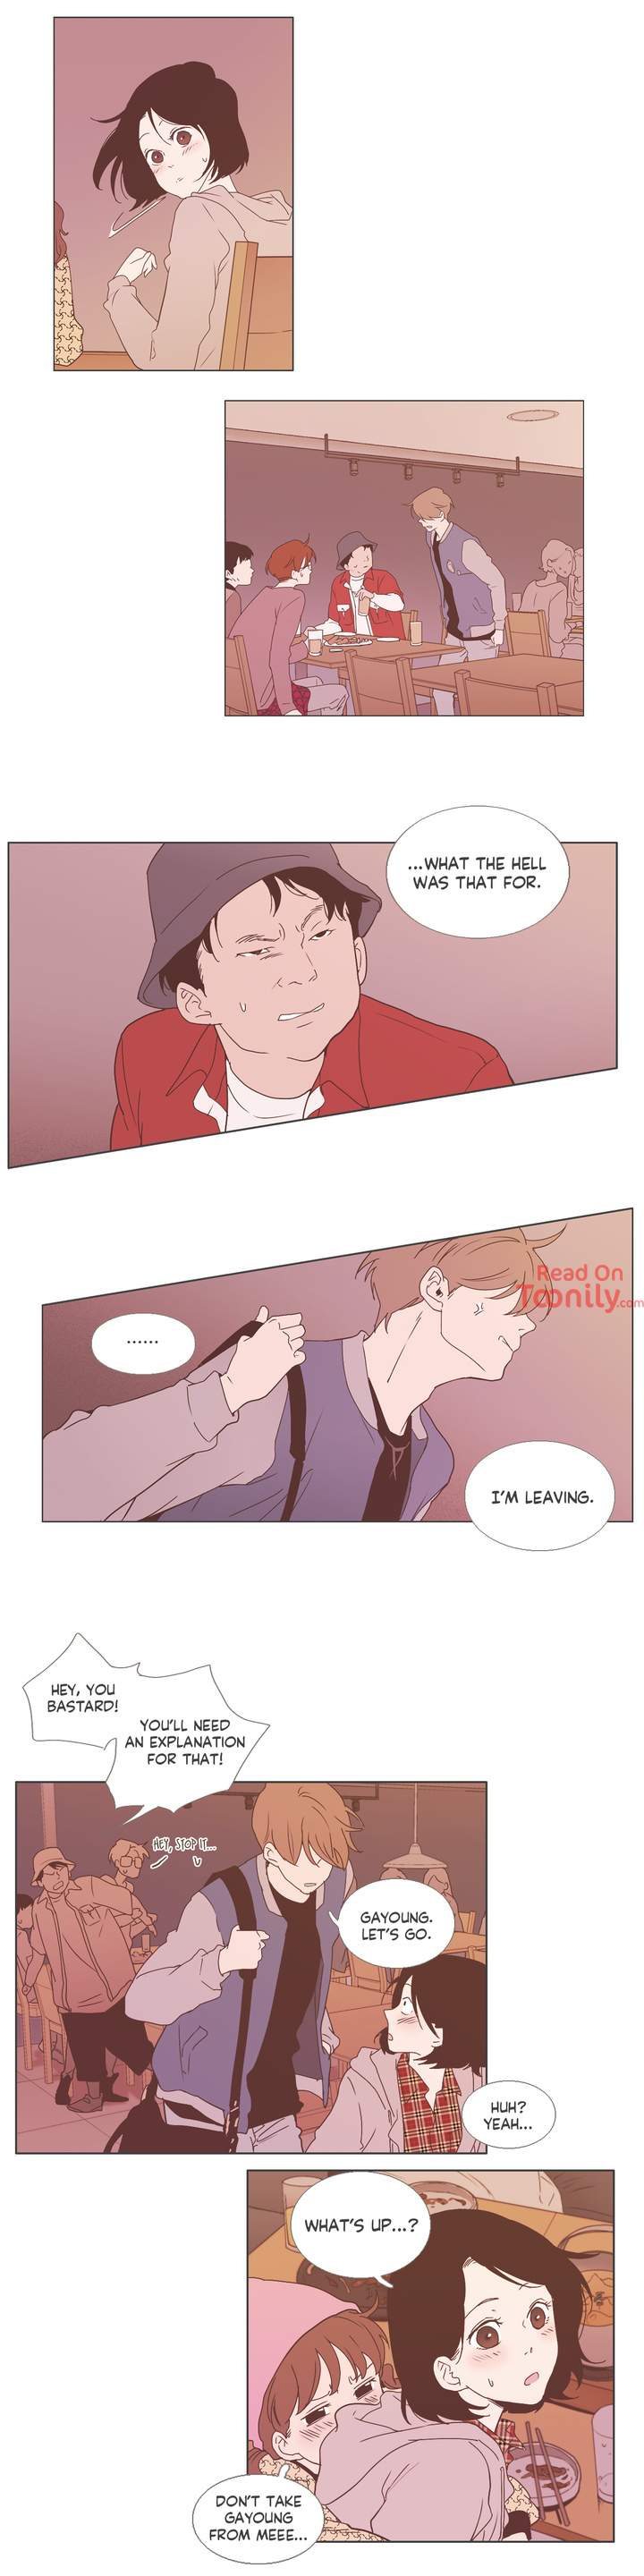 Something About Us - Chapter 6 Page 6